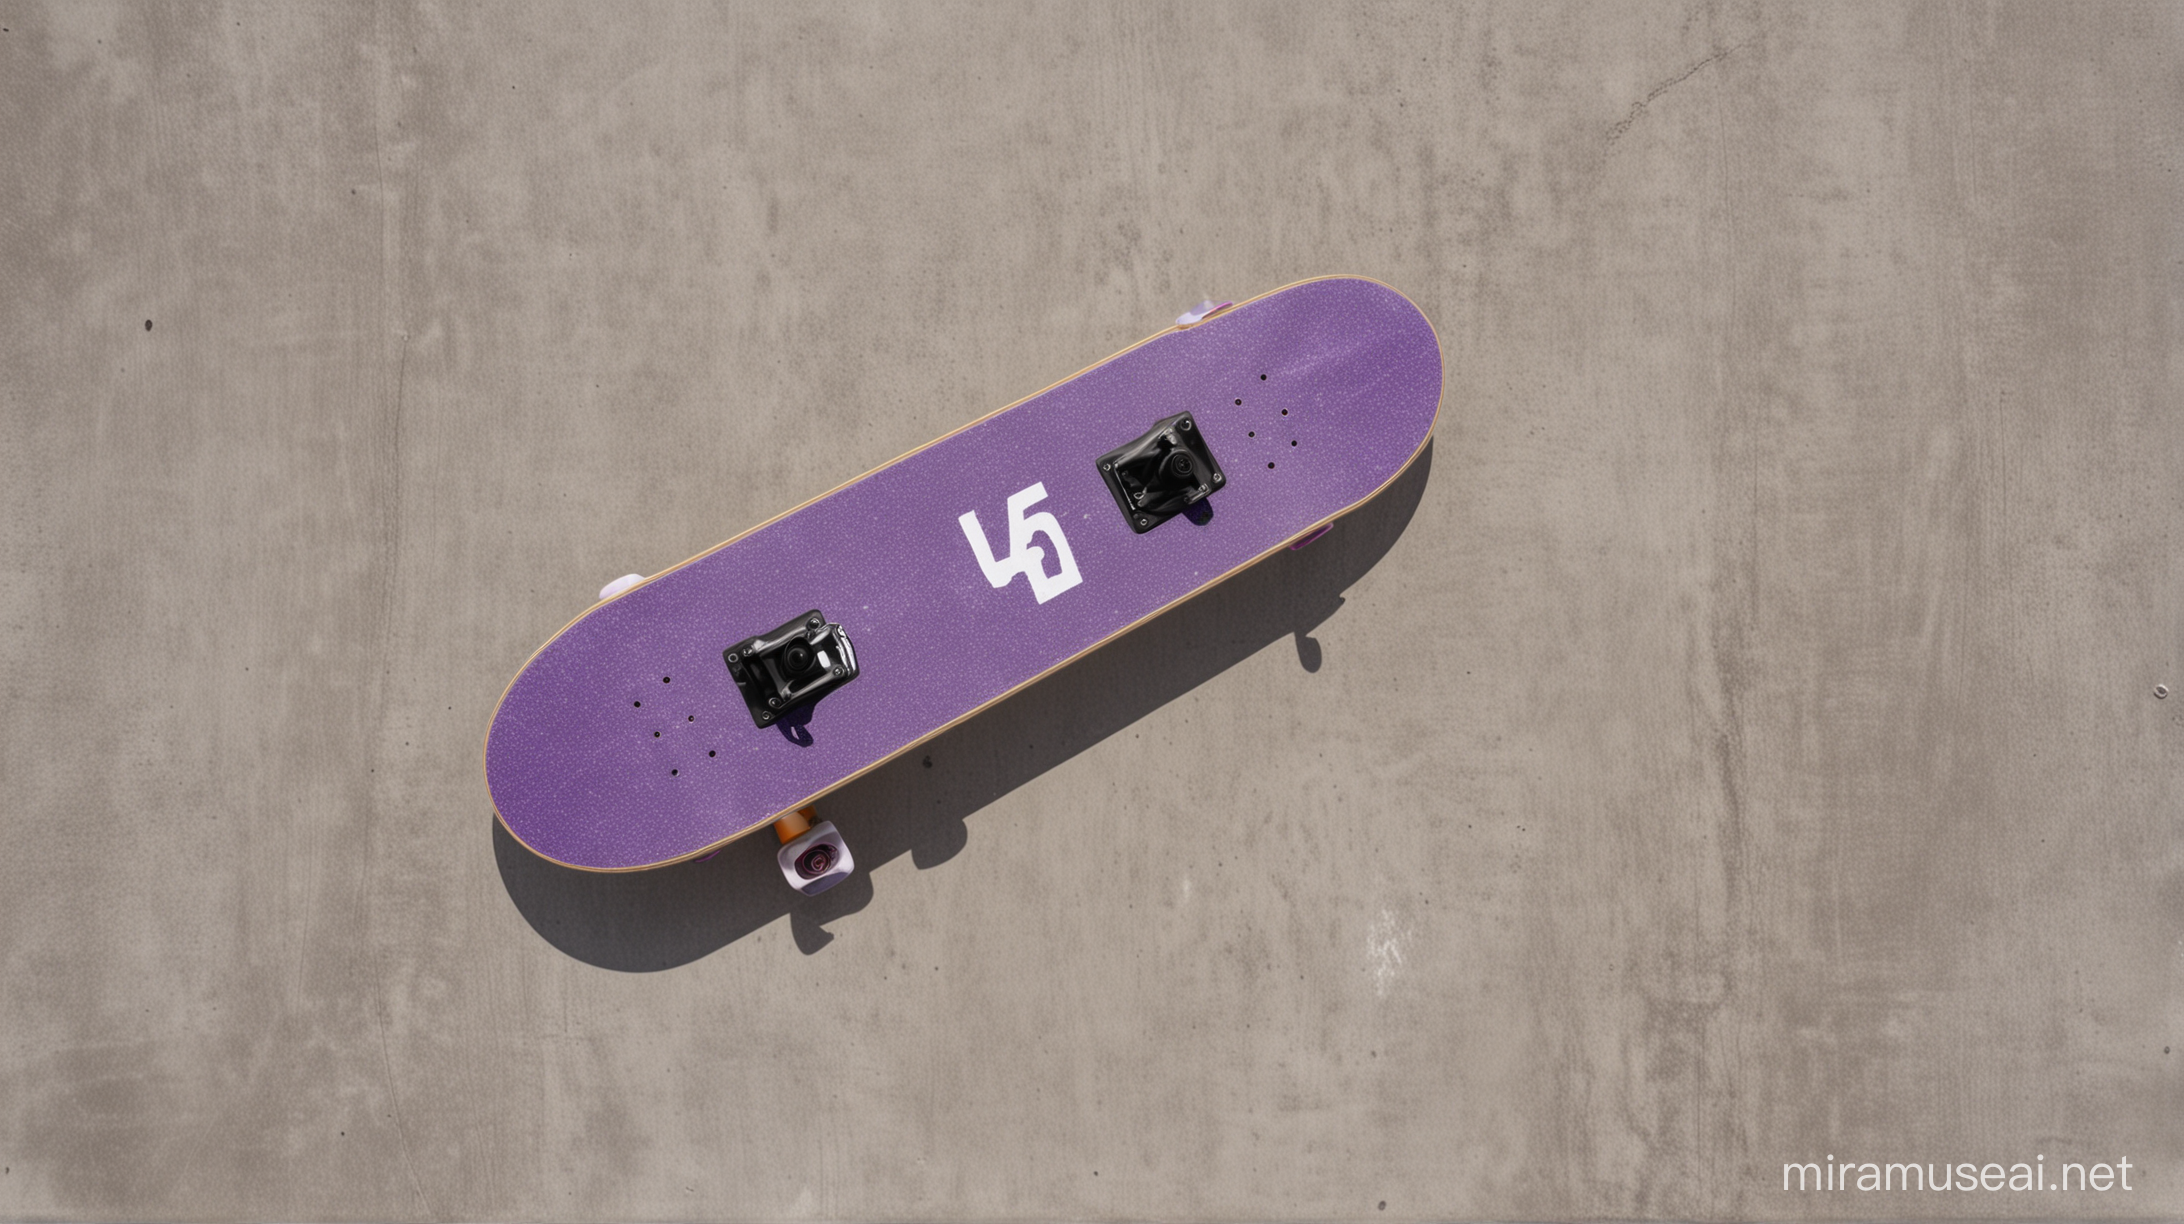 purple skateboard flat at 45 degree angle, wheels up, concrete background, letter sized magazine laid flat nearby, shot from above